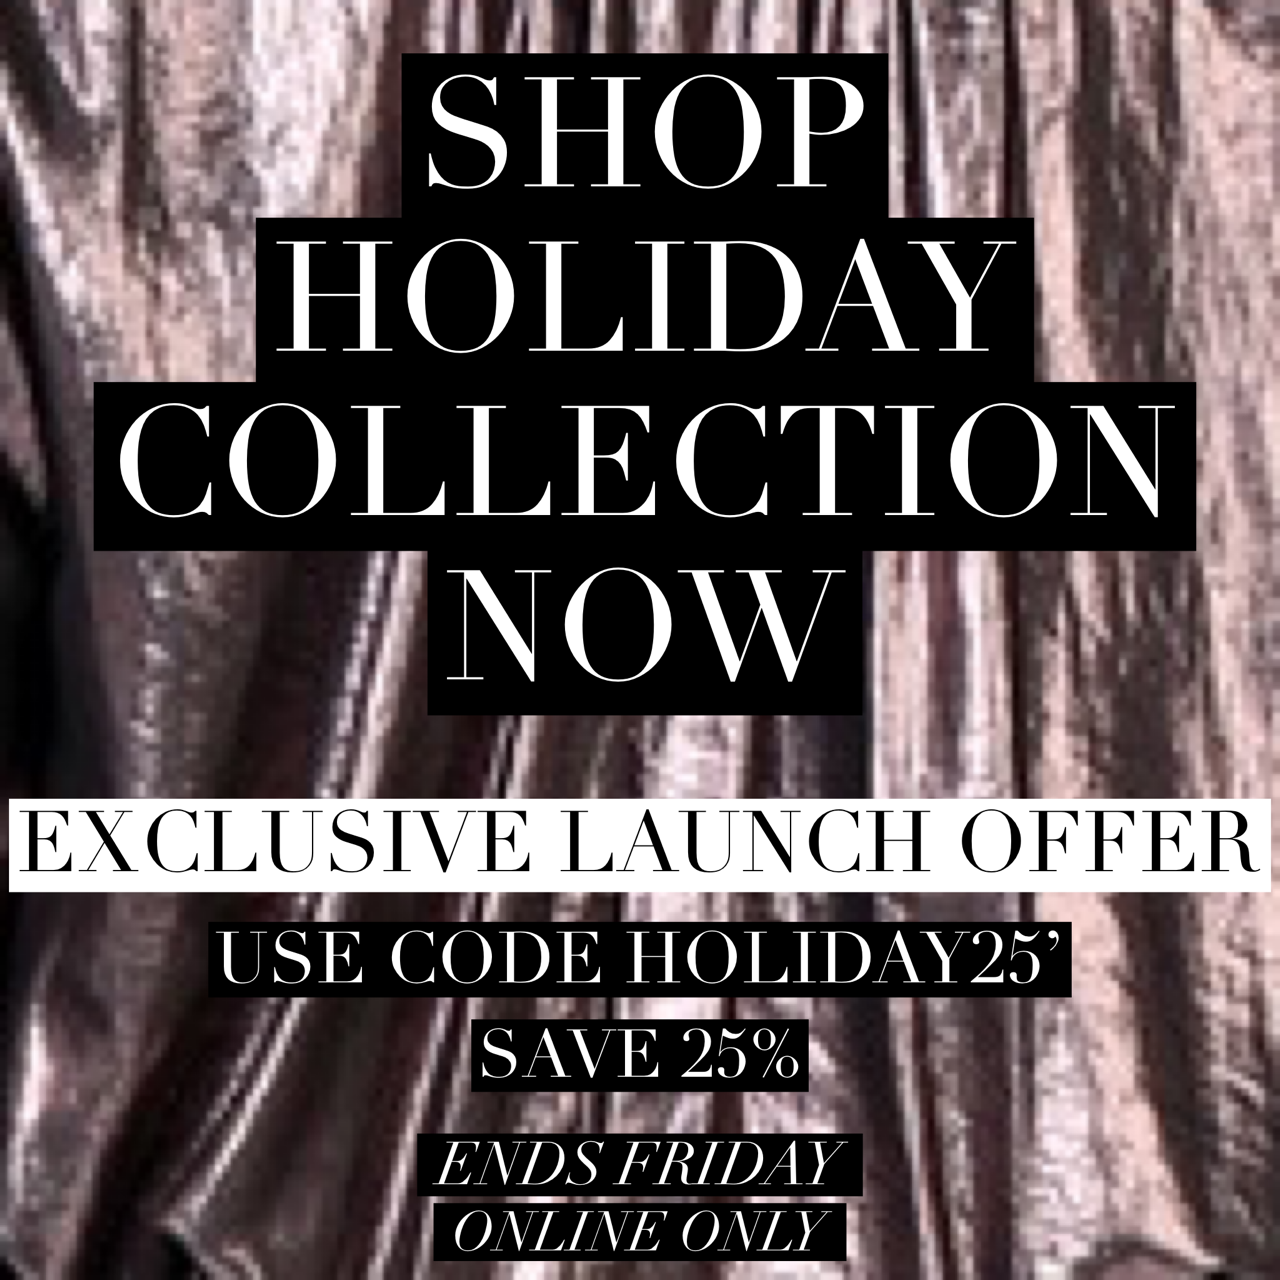 SAVE 25% & SHOP HOLIDAY COLLECTION NOW!